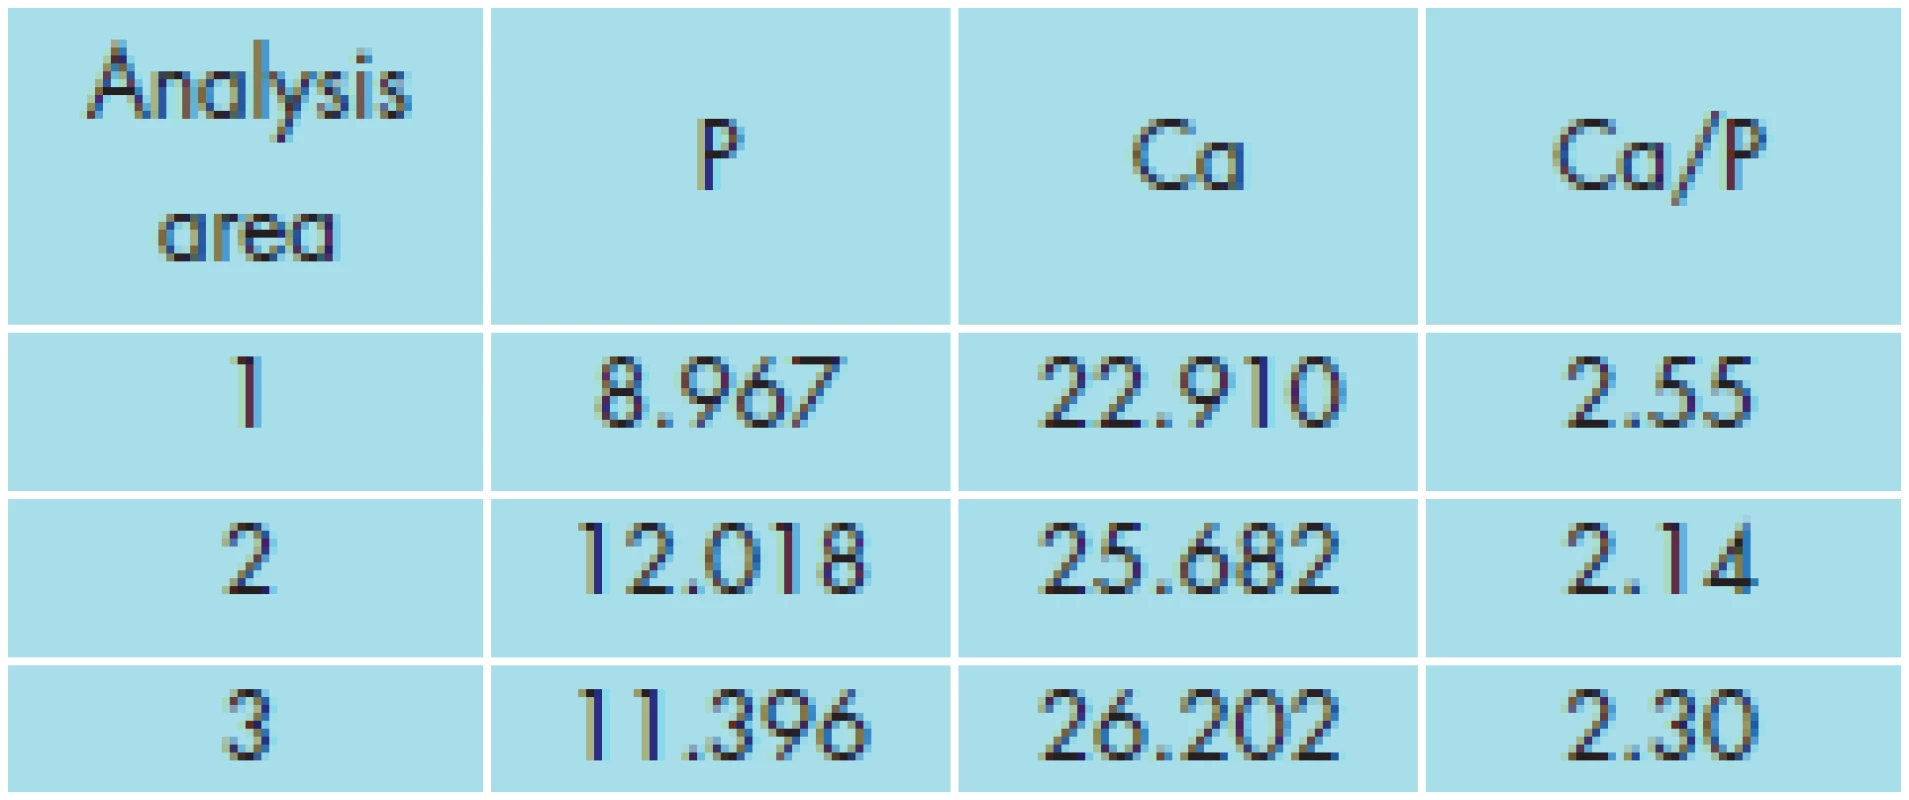 The concentrations of Ca and P in three areas of the investigated calcifications according to EDX analysis (wt.%).